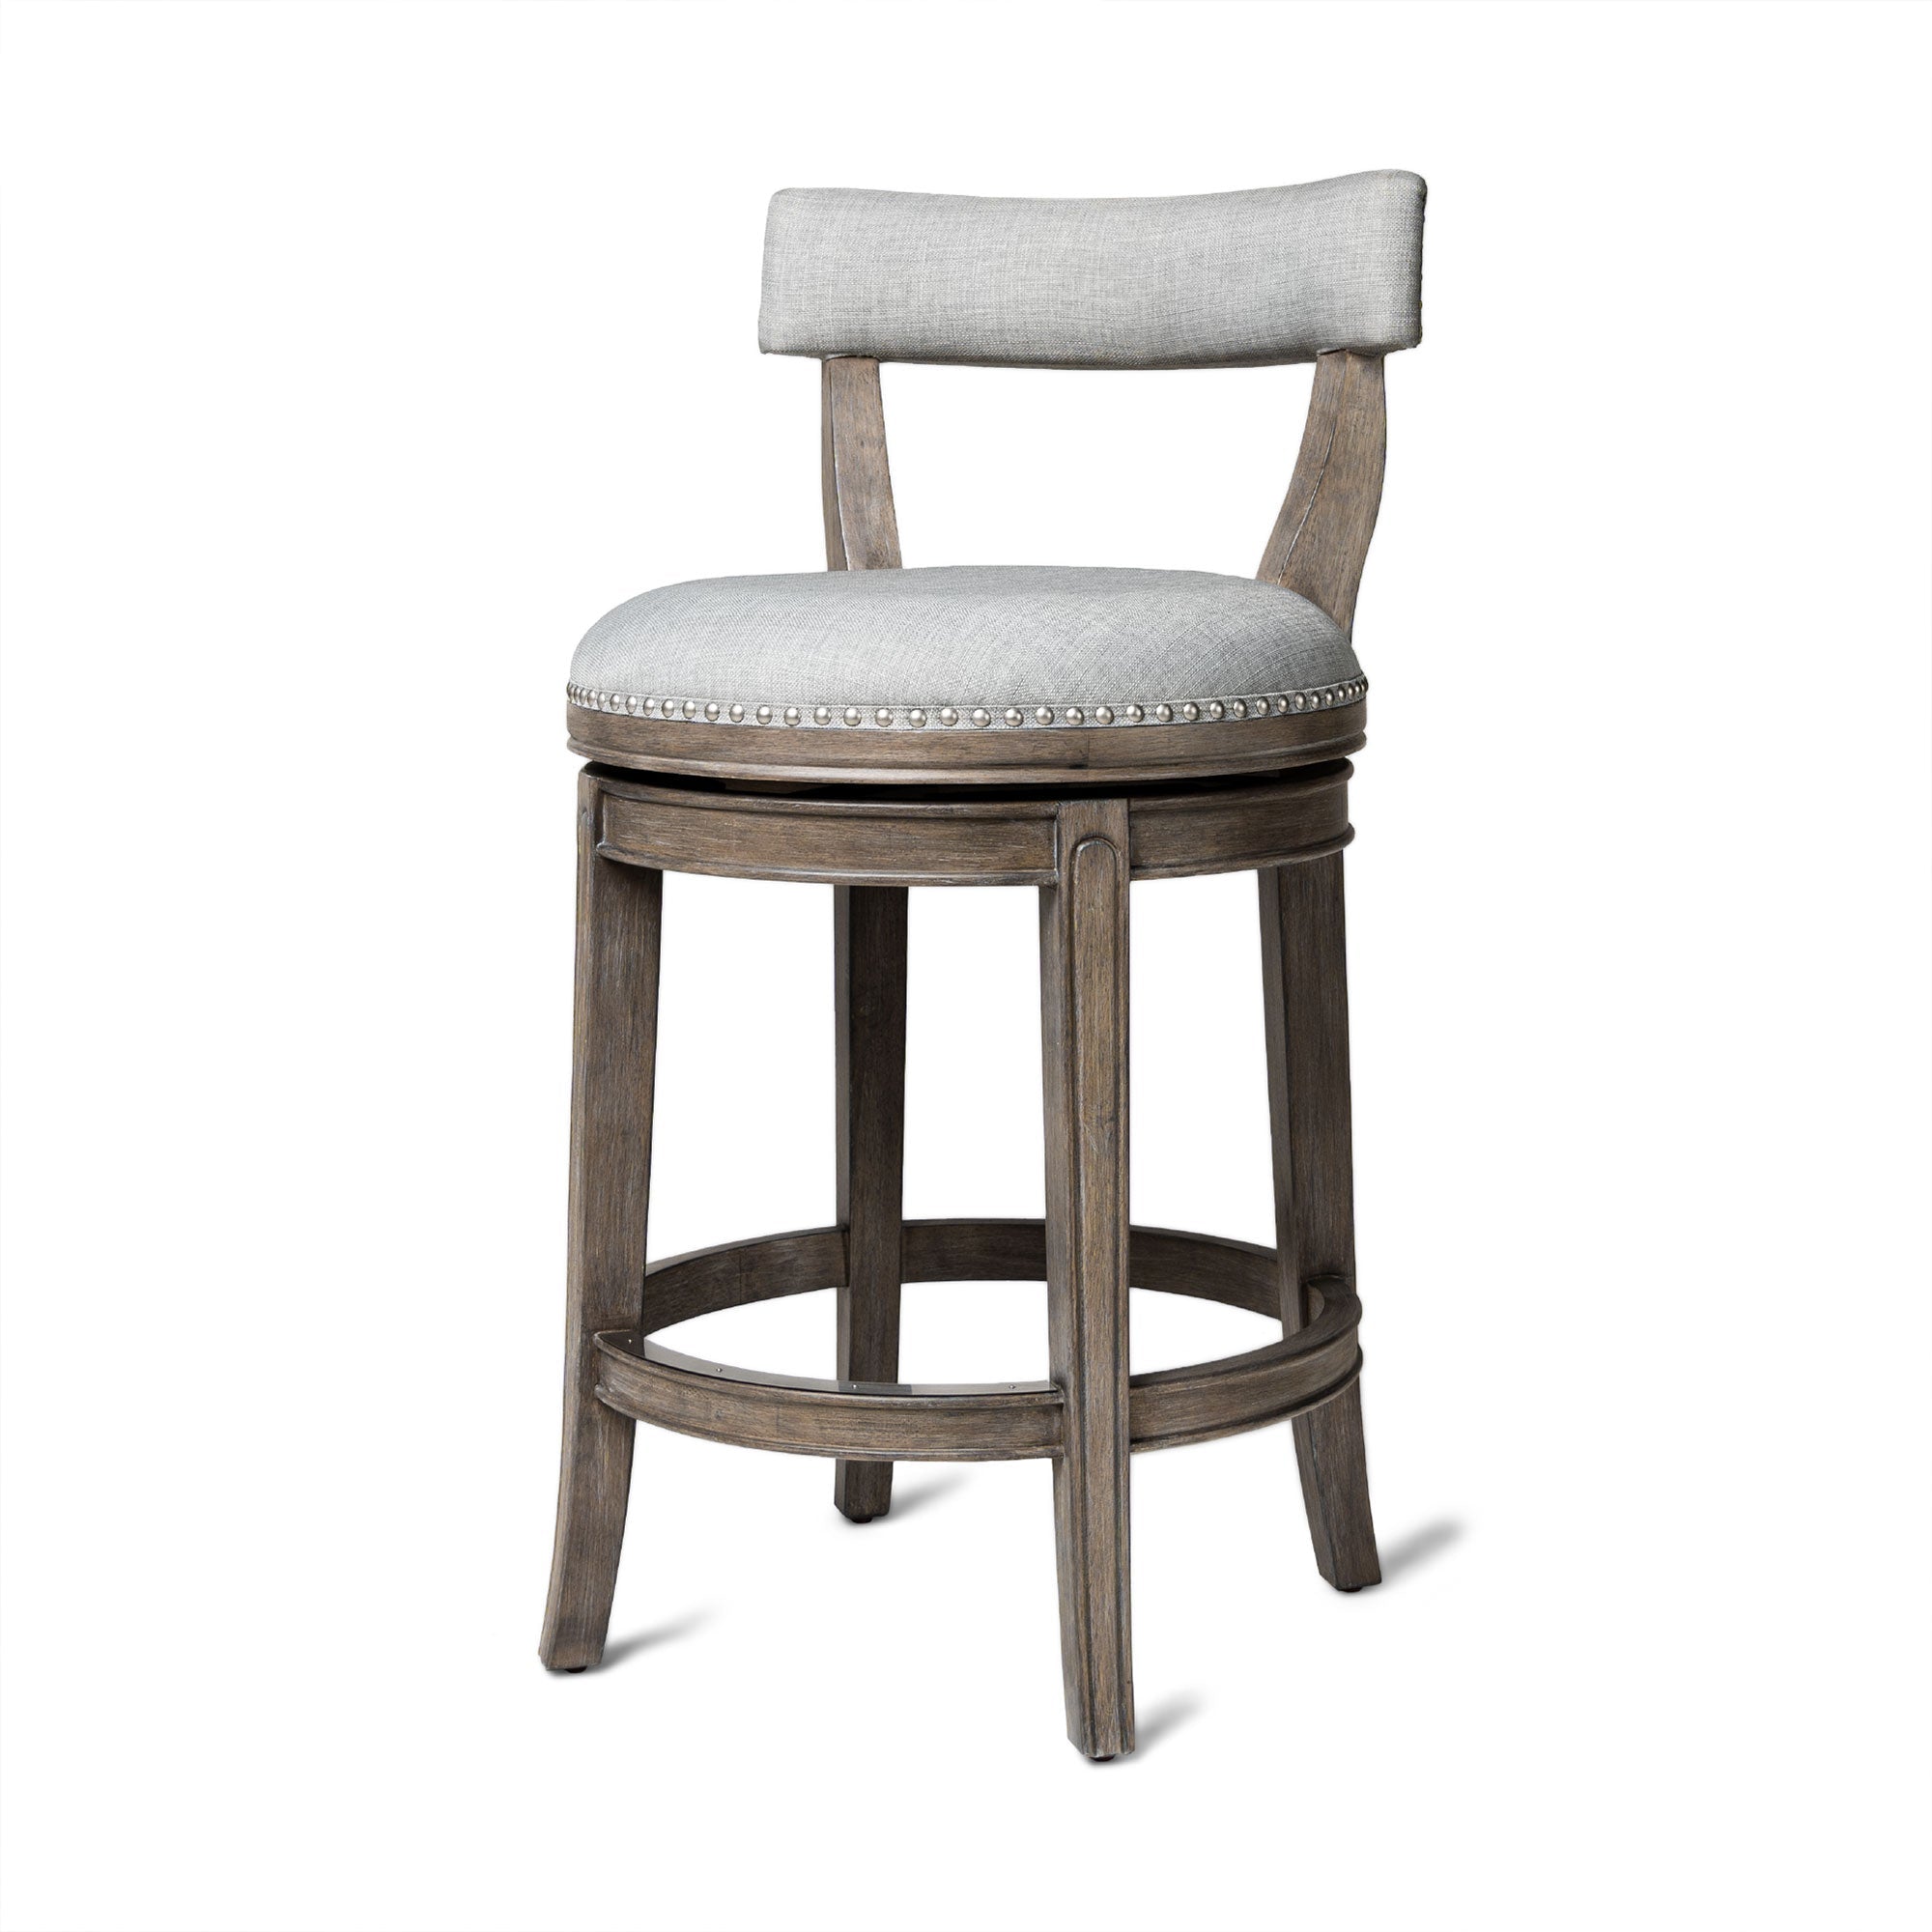 Alexander Counter Stool in Reclaimed Oak Finish w/ Ash Grey Fabric Upholstery